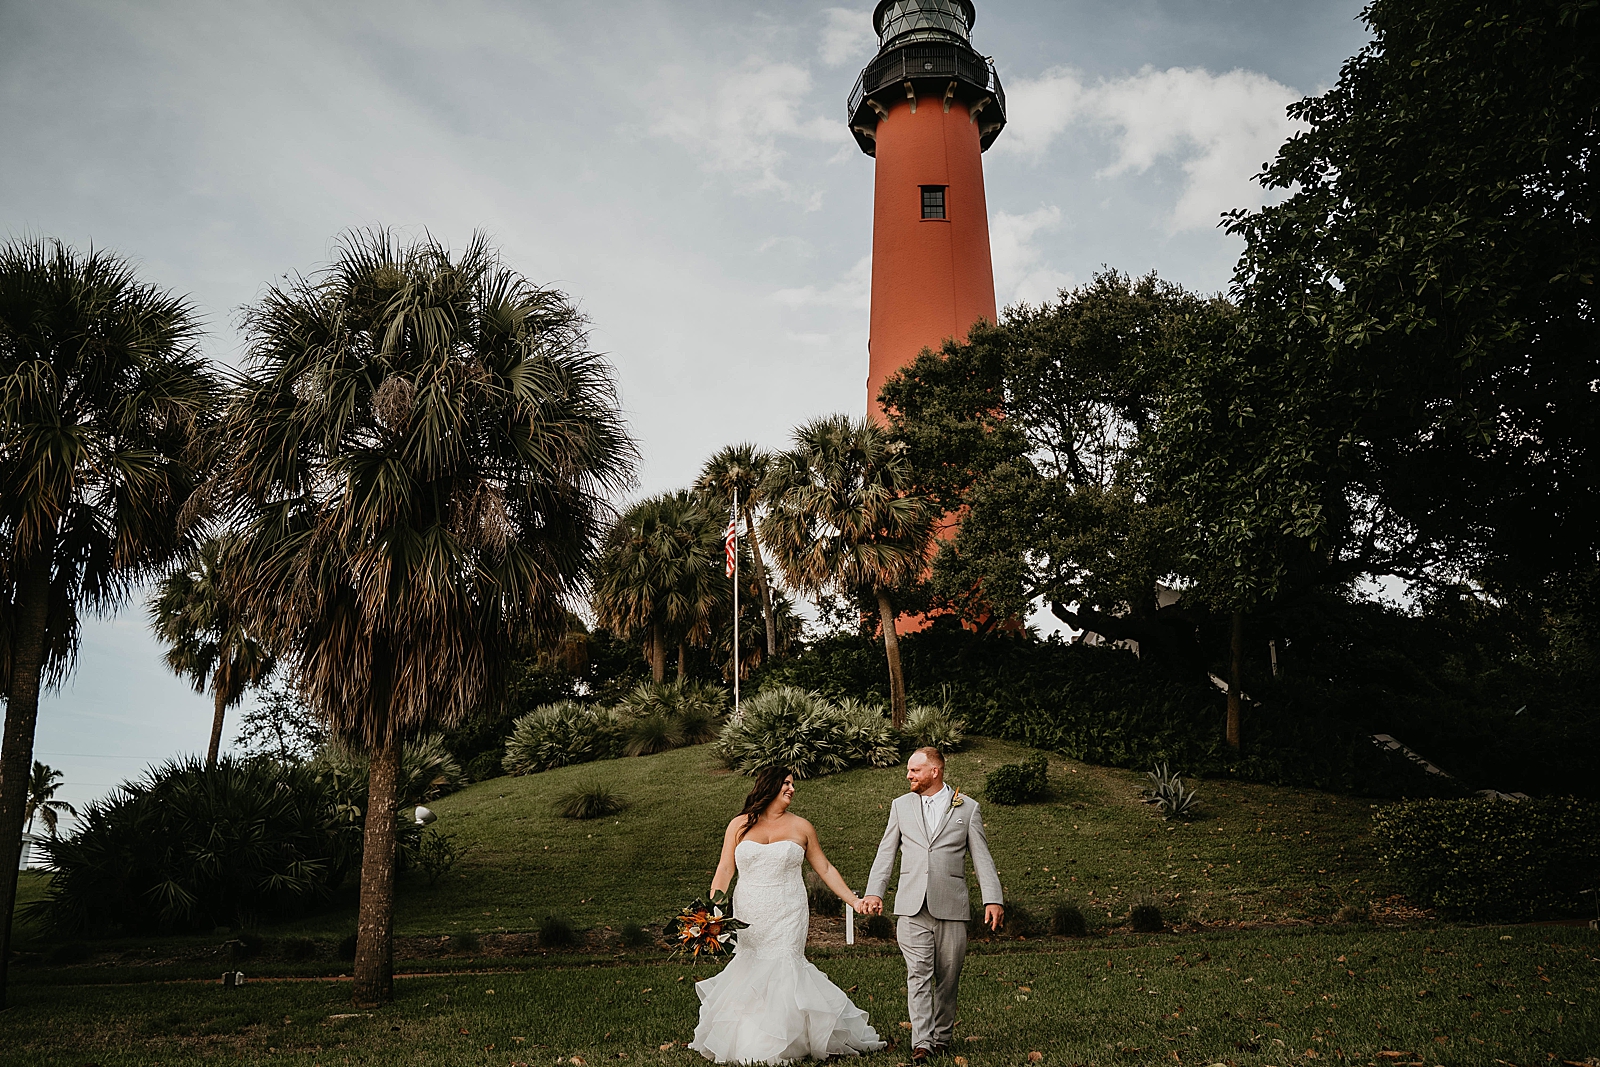 Bride and groom walking down the hill holding hands with palm trees and lighthouse in the background Jupiter Lighthouse Wedding Photography captured by South Florida Wedding Photographer Krystal Capone Photography